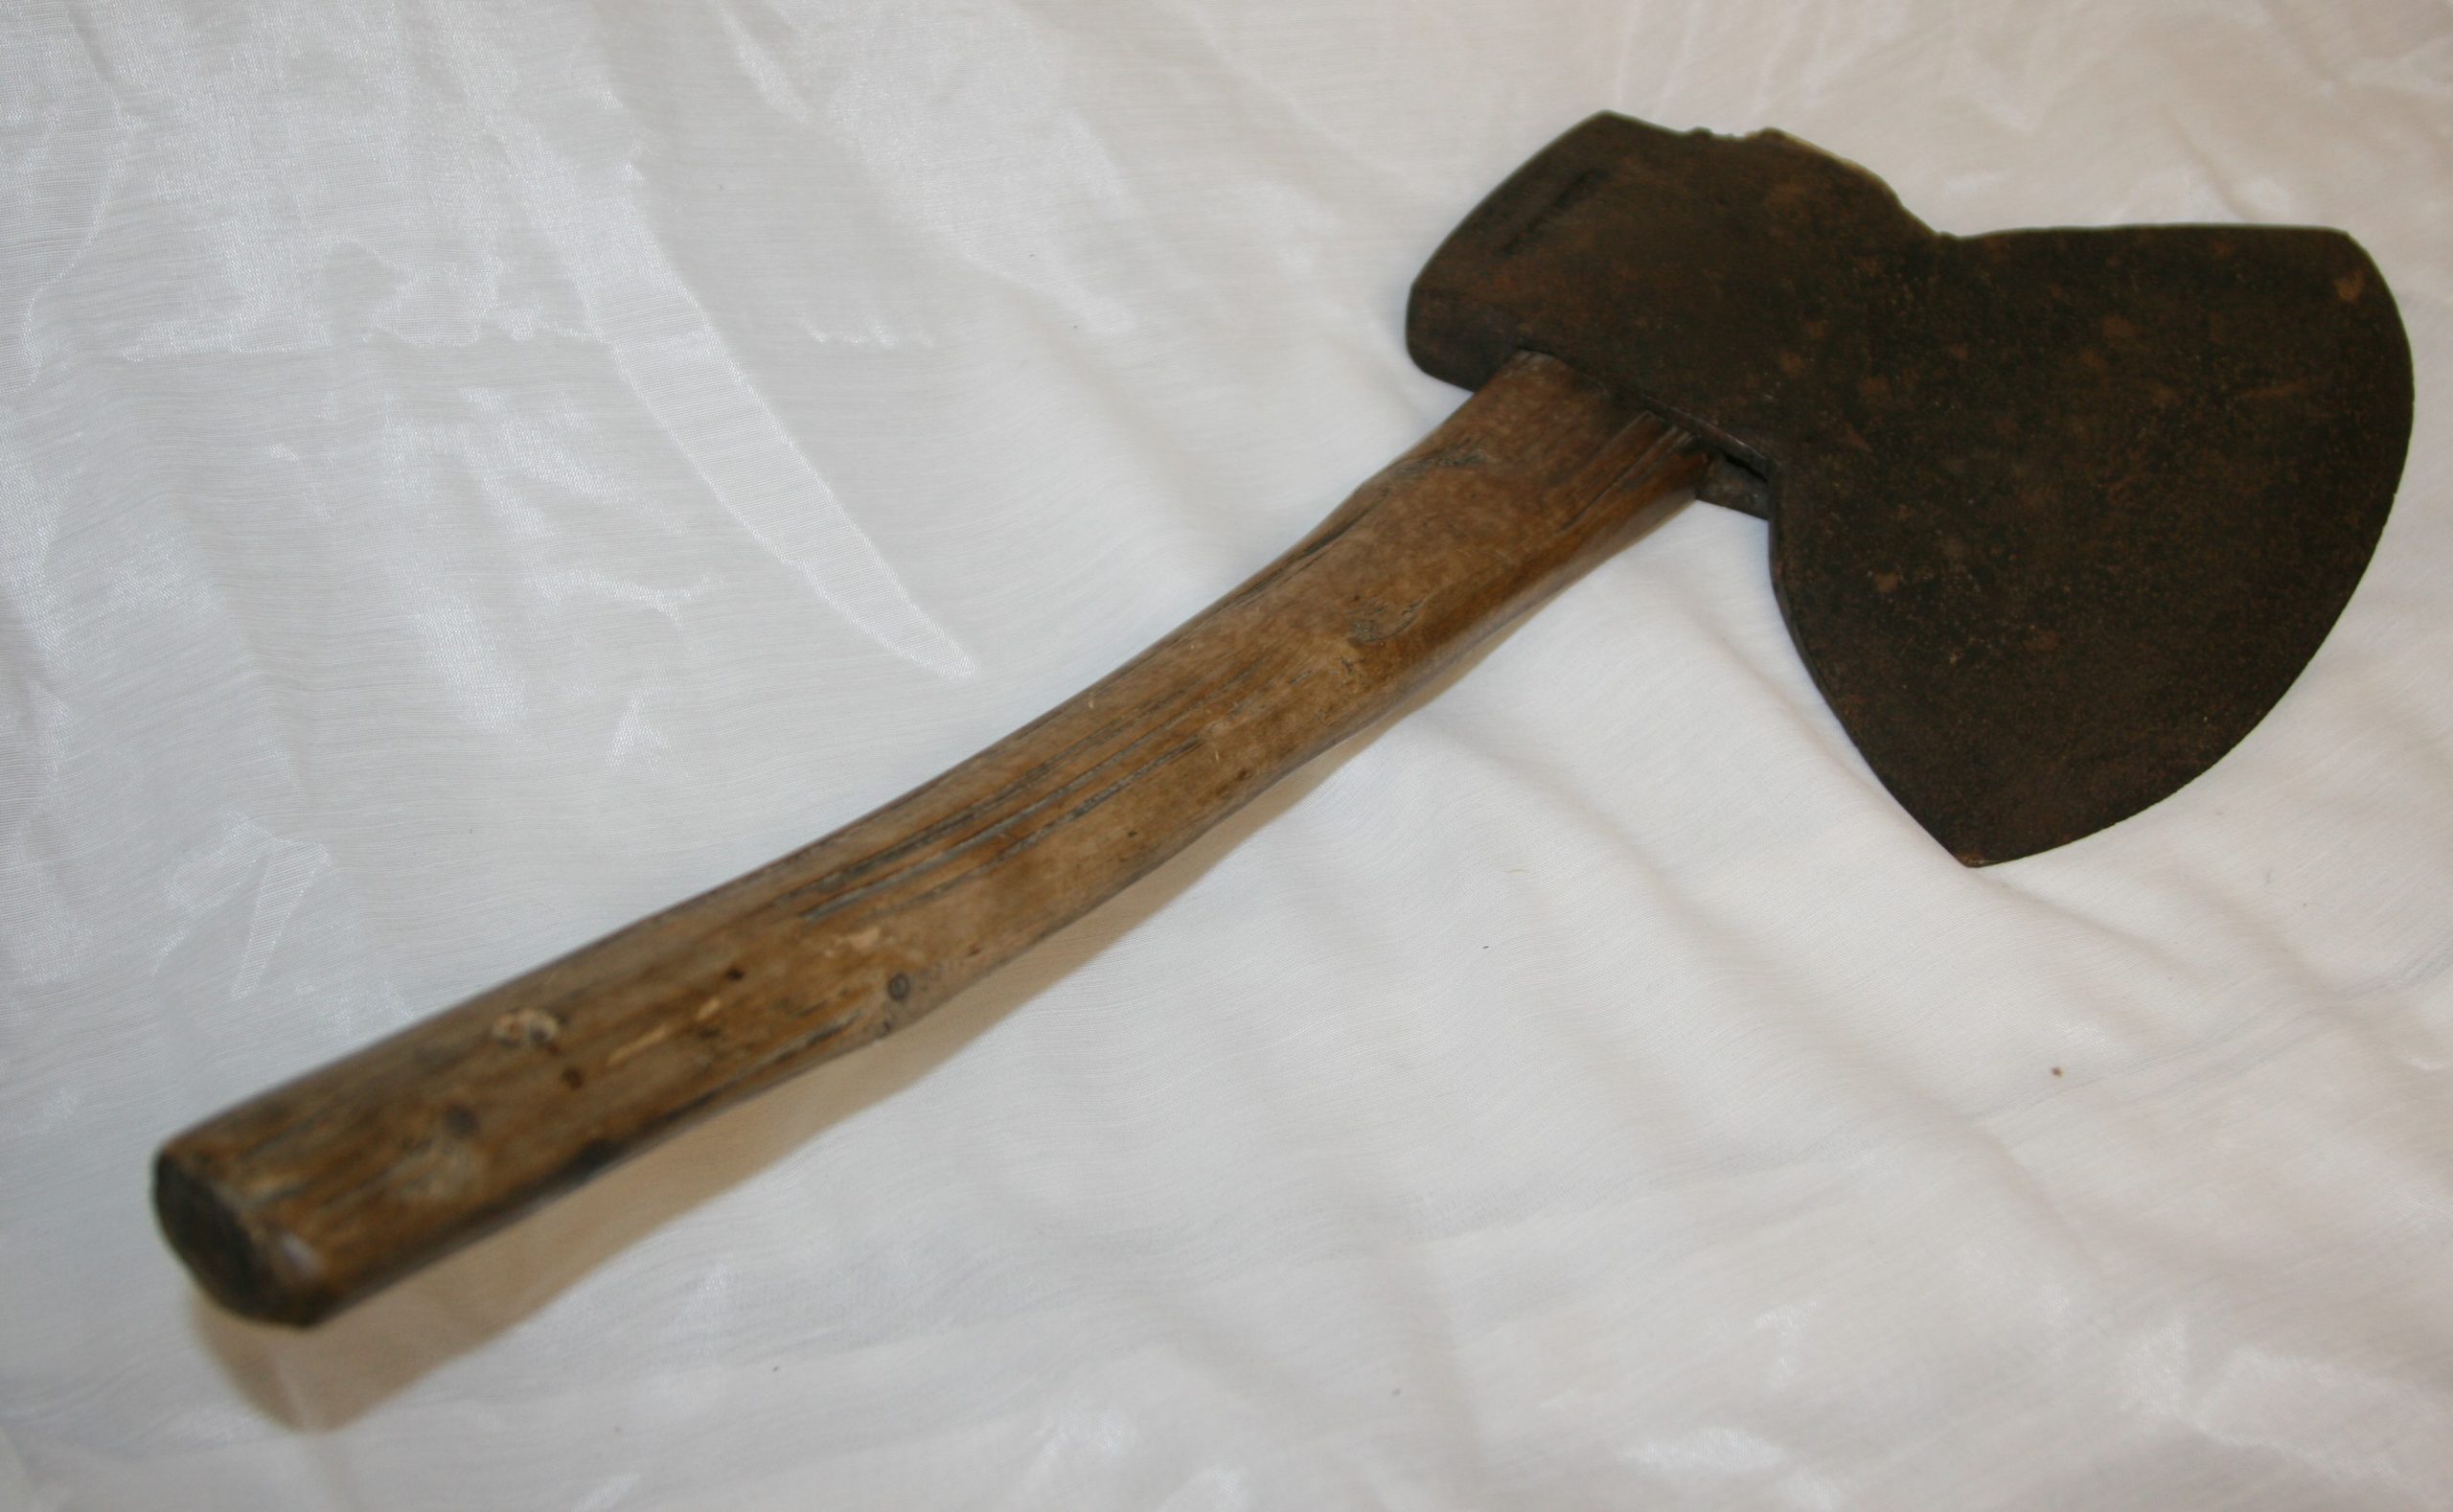 The broad-axe made by Samuel Lount. The axe bears the word "S. Lount, cast steel." Lount was executed for his part in the Rebellion of 1837.